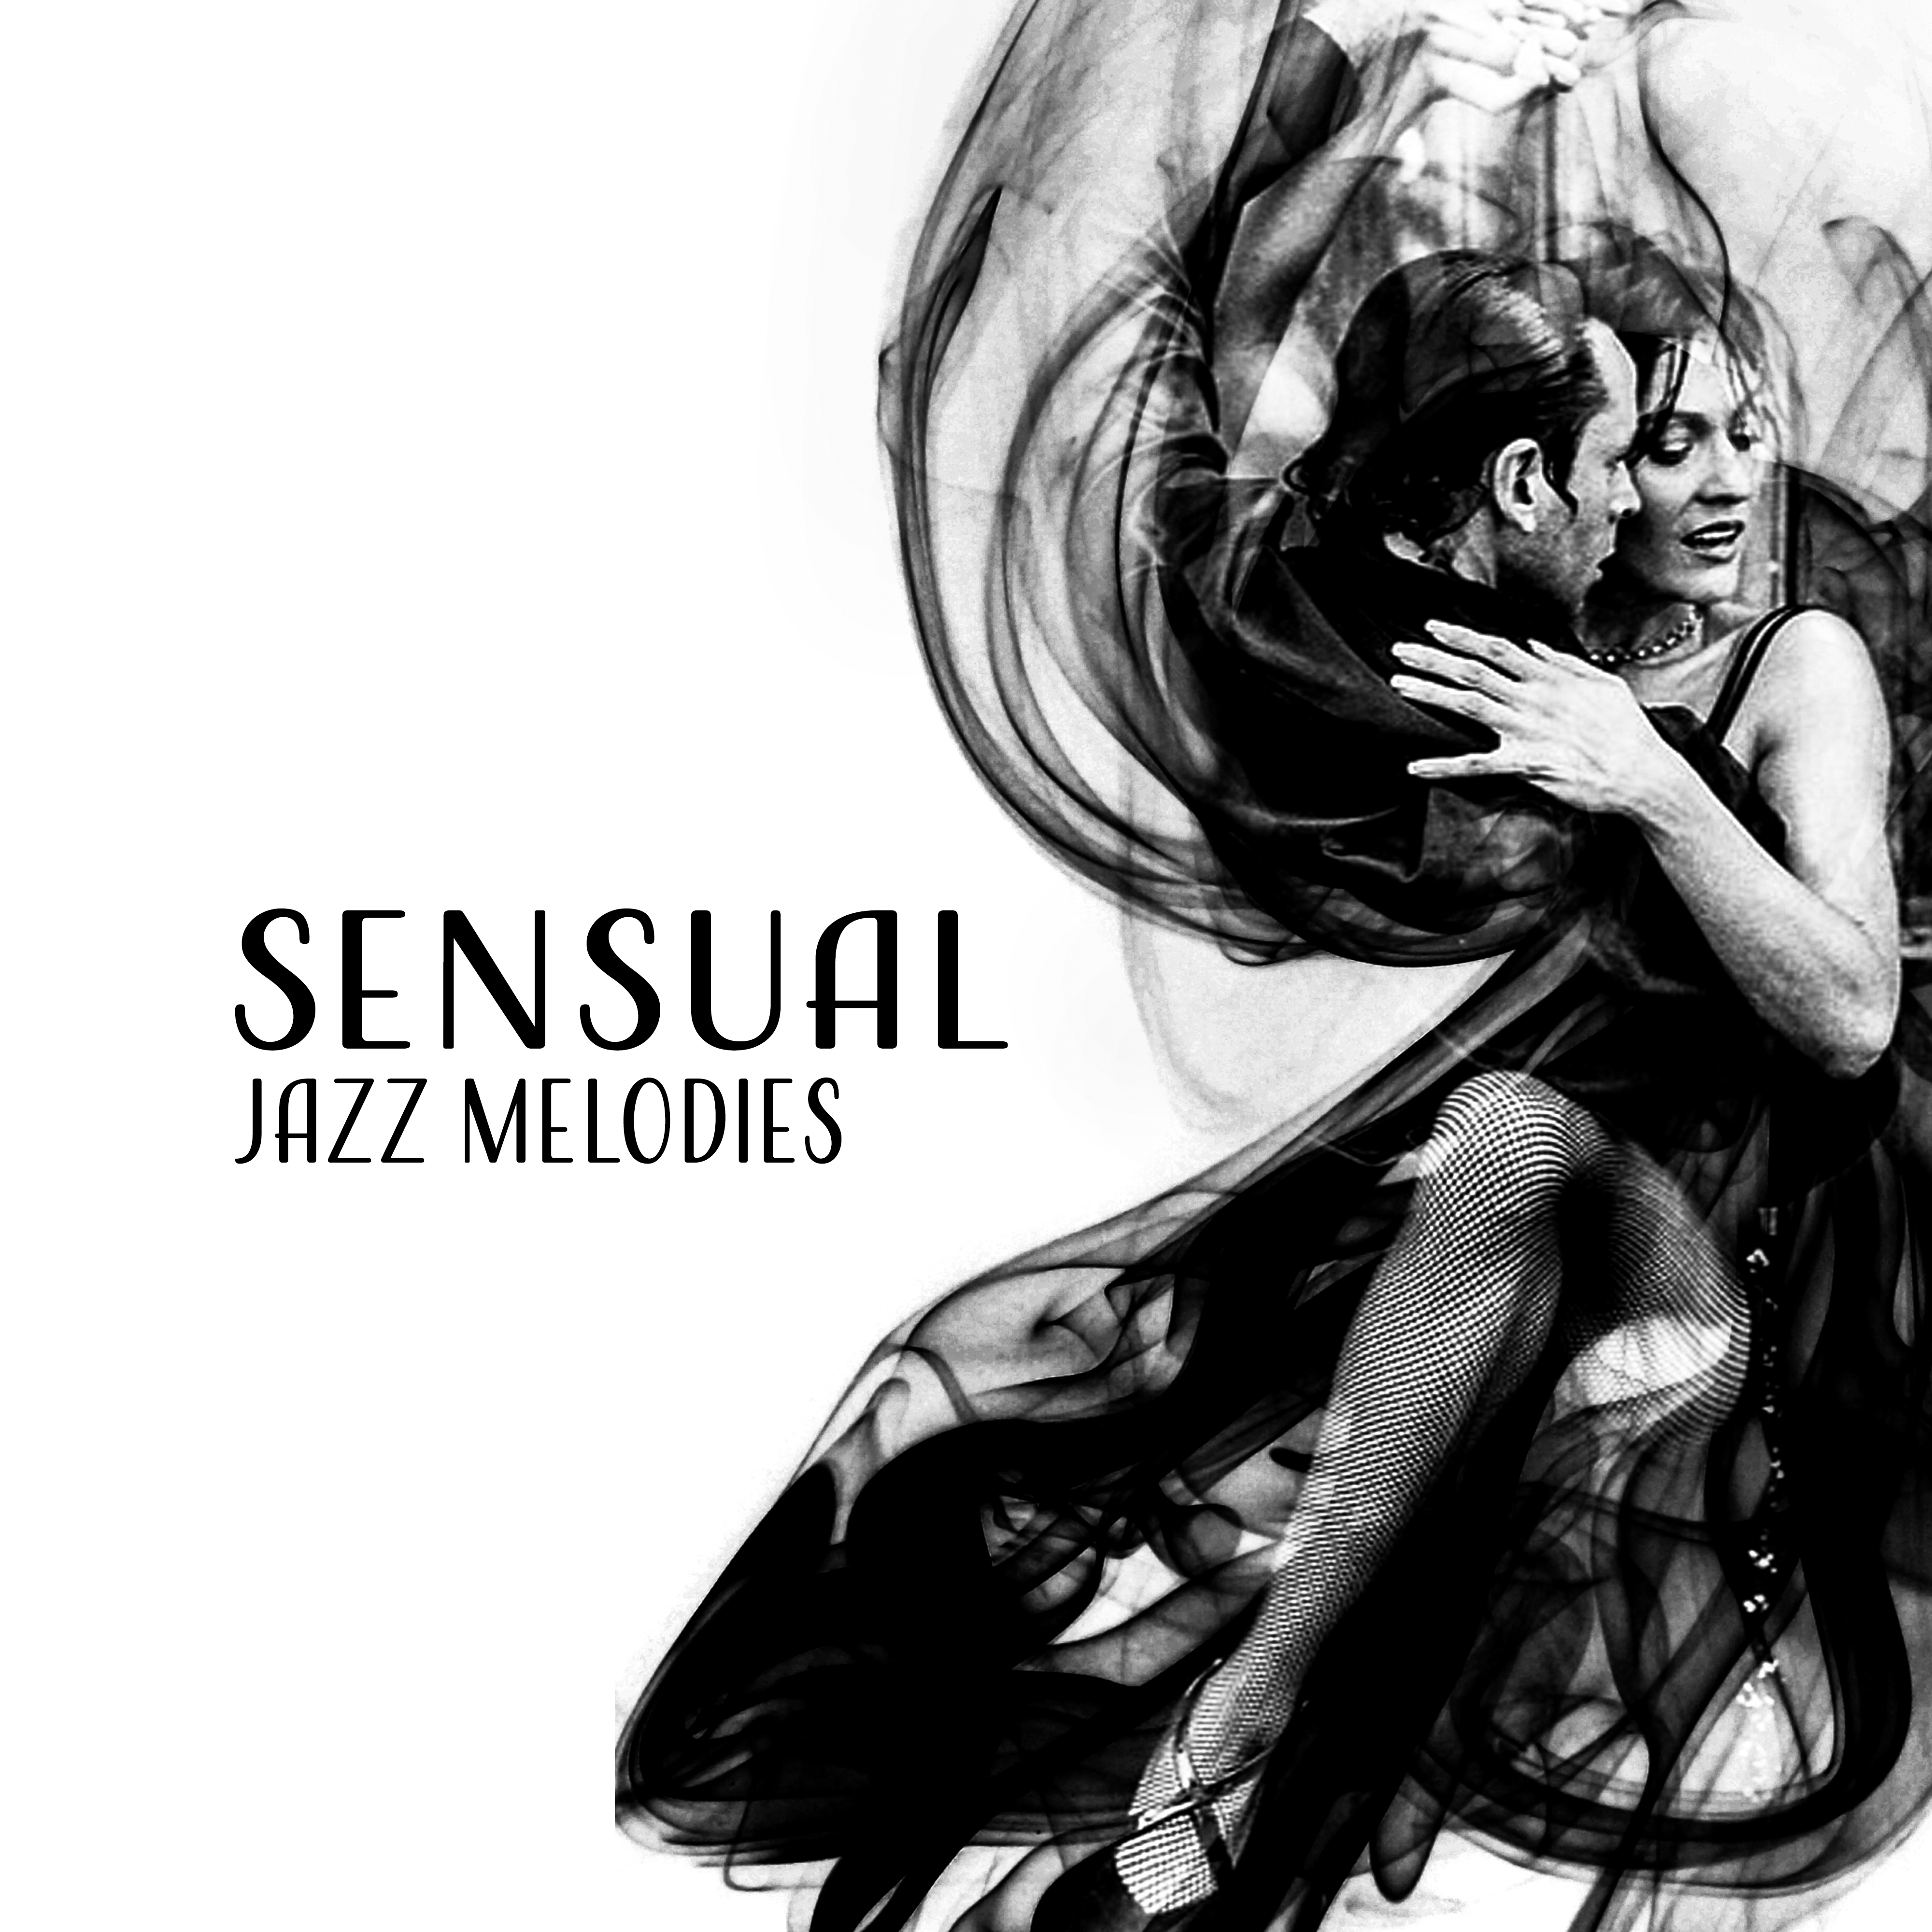 Sensual Jazz Melodies – Easy Listening, Romantic Jazz Music, Sounds to Calm Down, Stress Relieve, Piano Bar